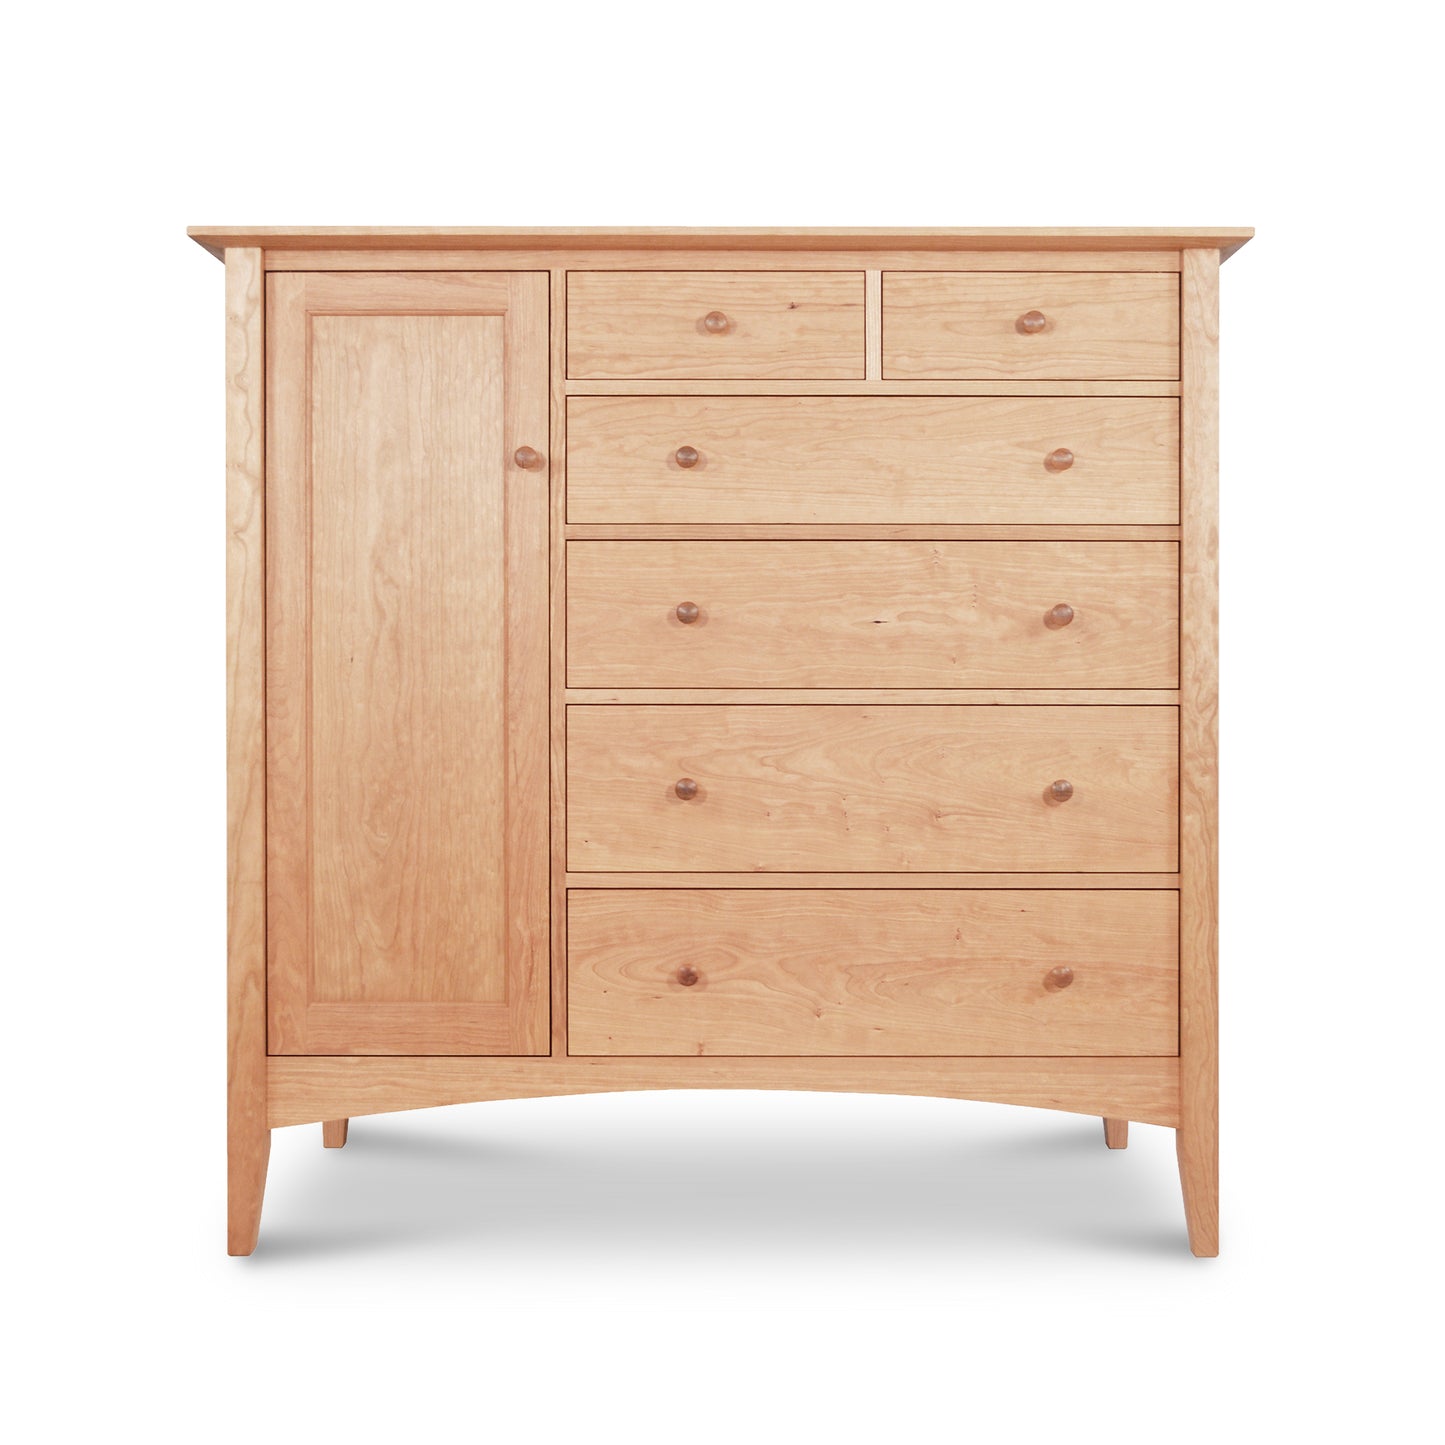 This upscale bedroom furniture piece showcases Vermont craftsmanship, featuring the elegant Maple Corner Woodworks American Shaker Gent's Chest with two spacious drawers.